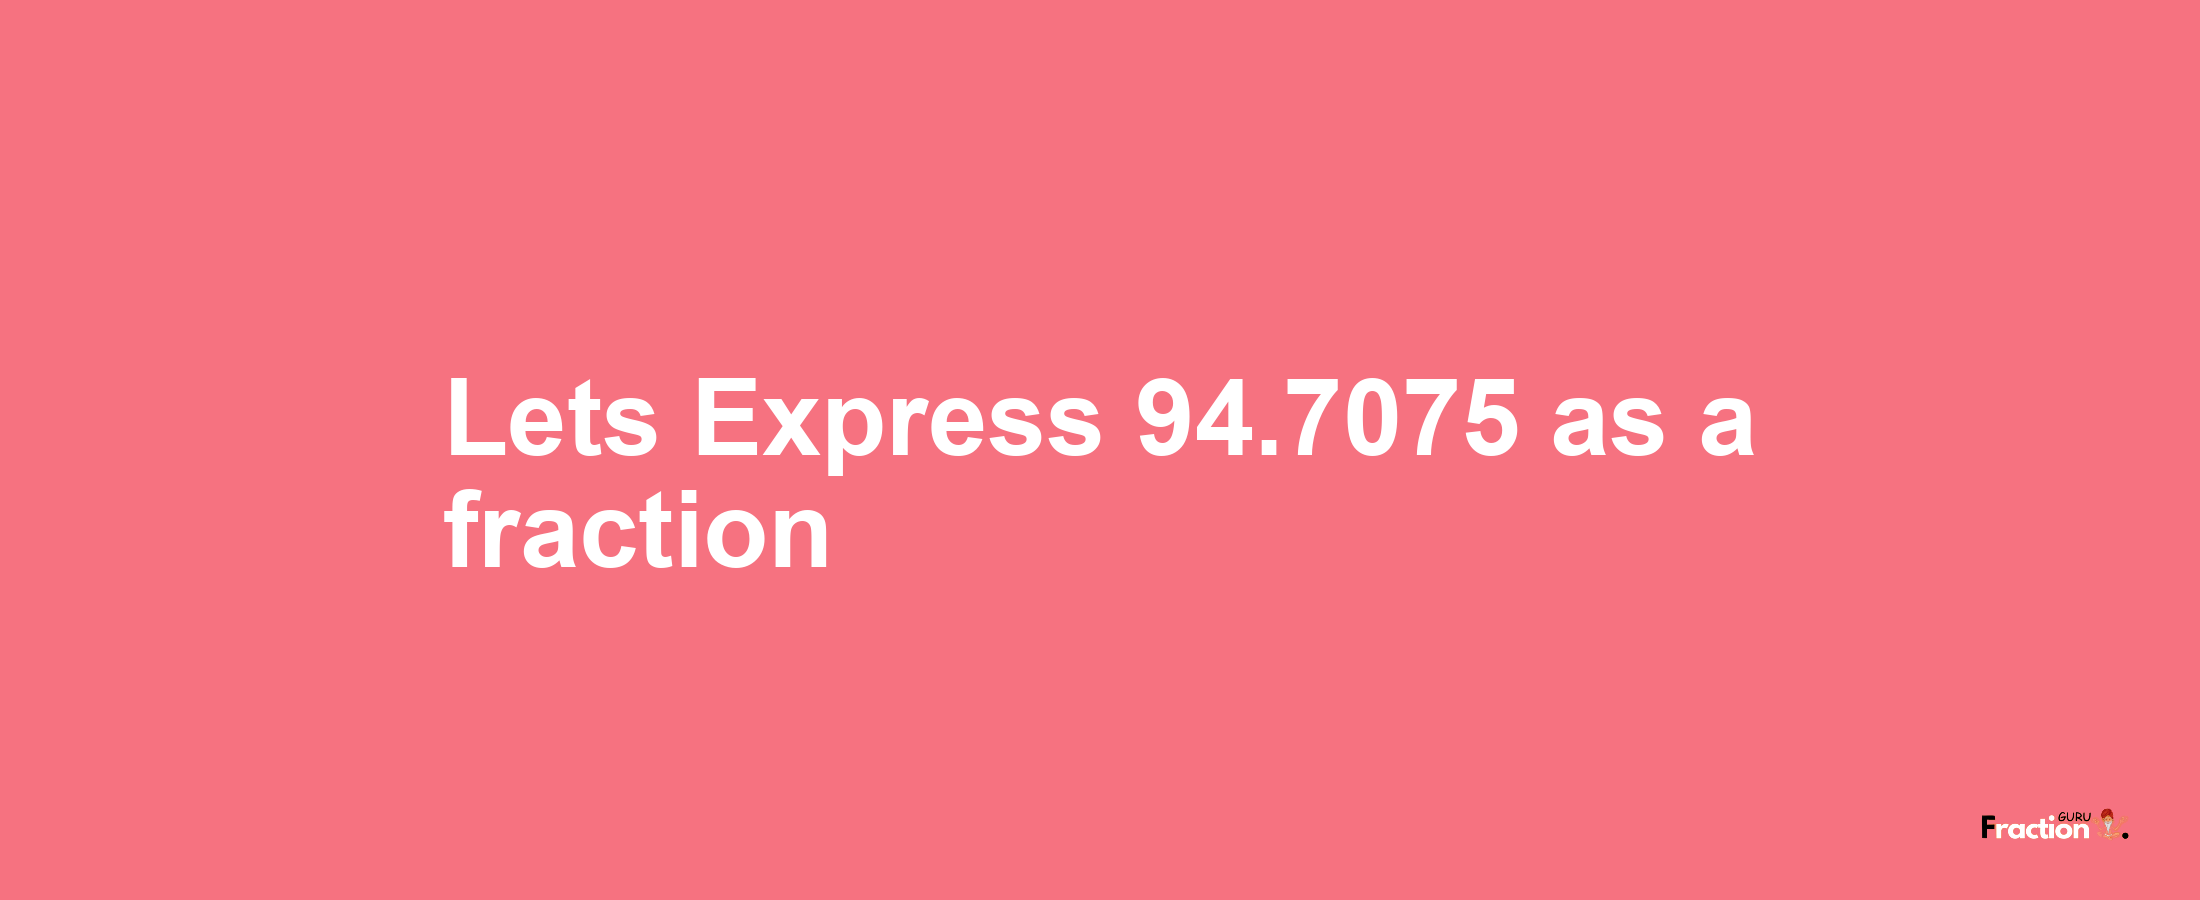 Lets Express 94.7075 as afraction